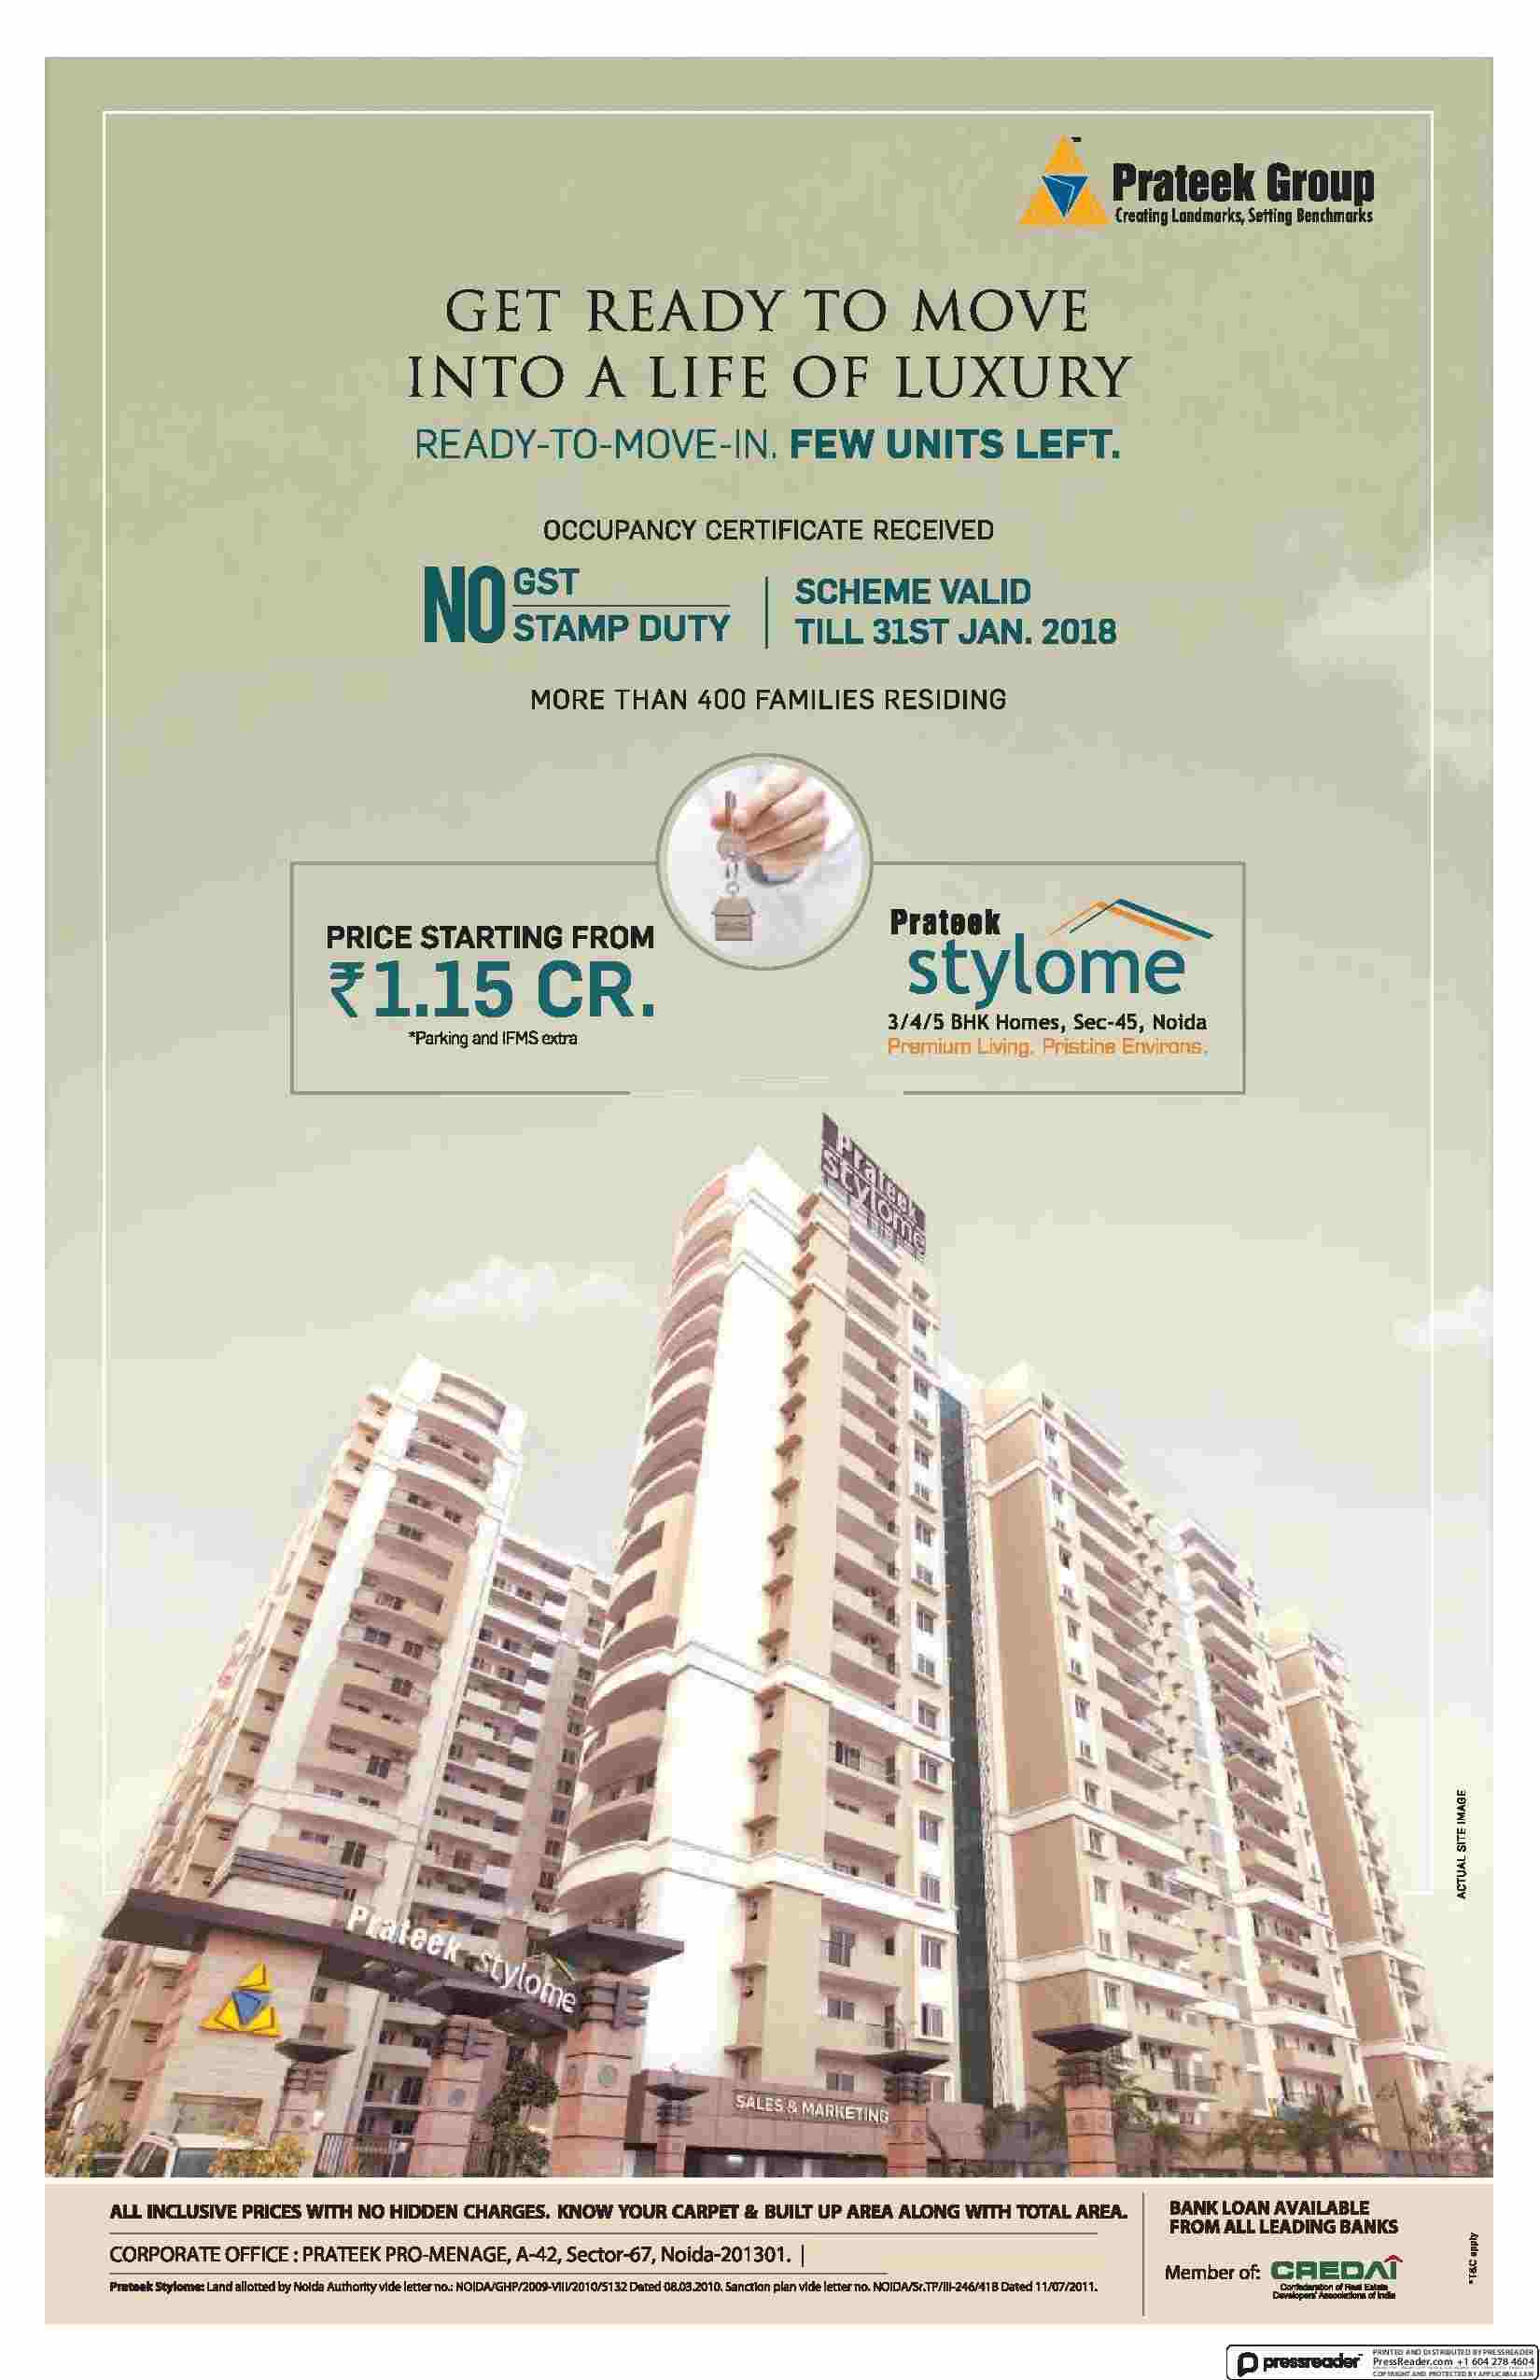 Get ready to move into a life of luxury at Prateek Stylome in Noida Update